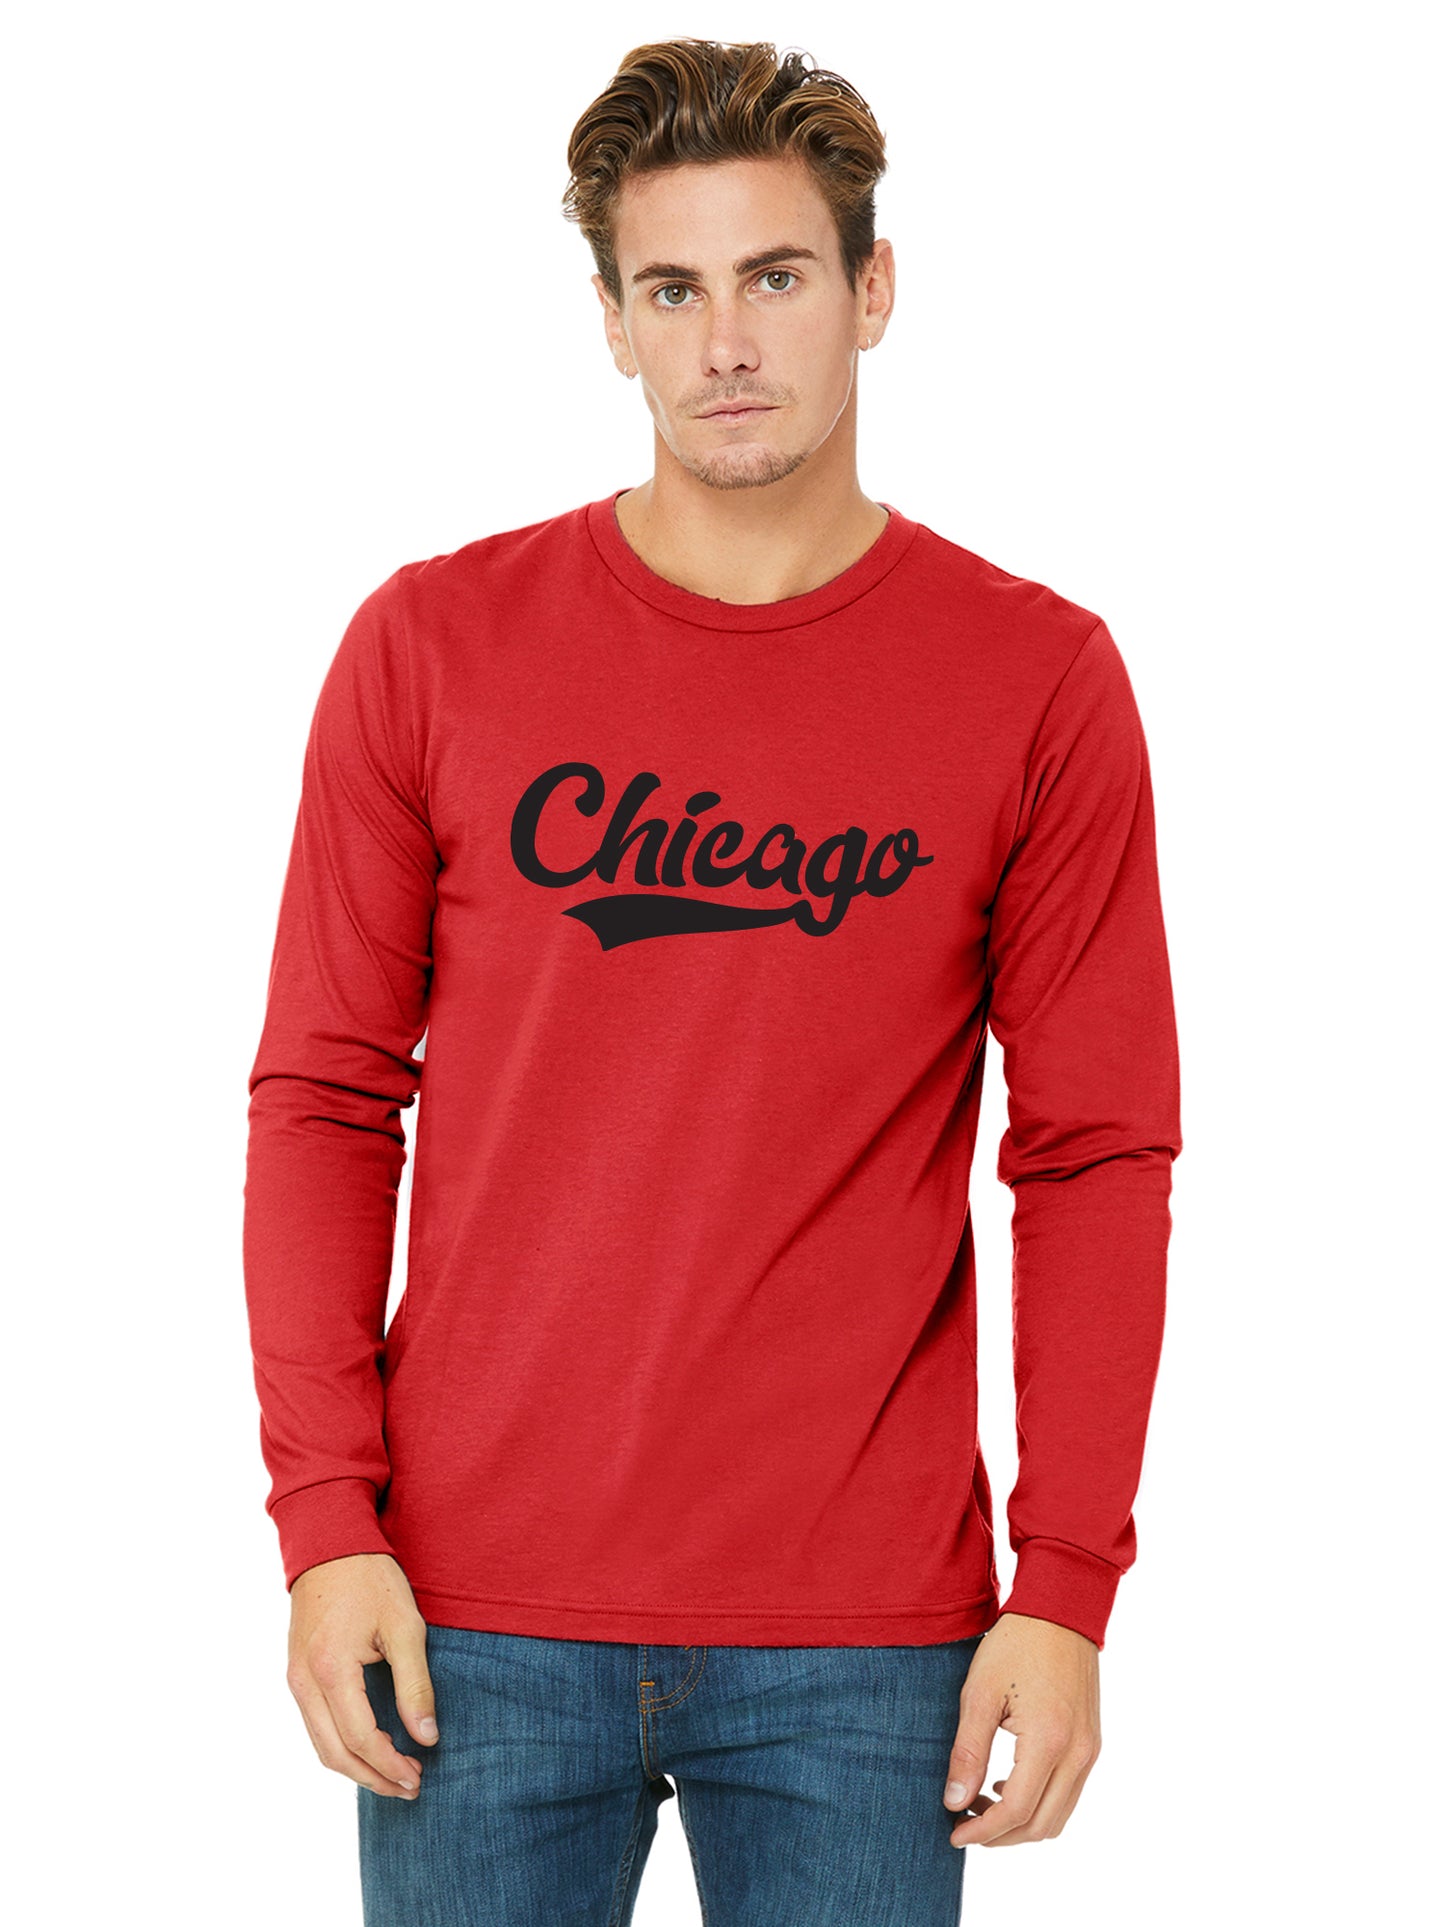 Daxton Premium Script Cities Long Sleeves Tshirt Soft Med Weight Cotton